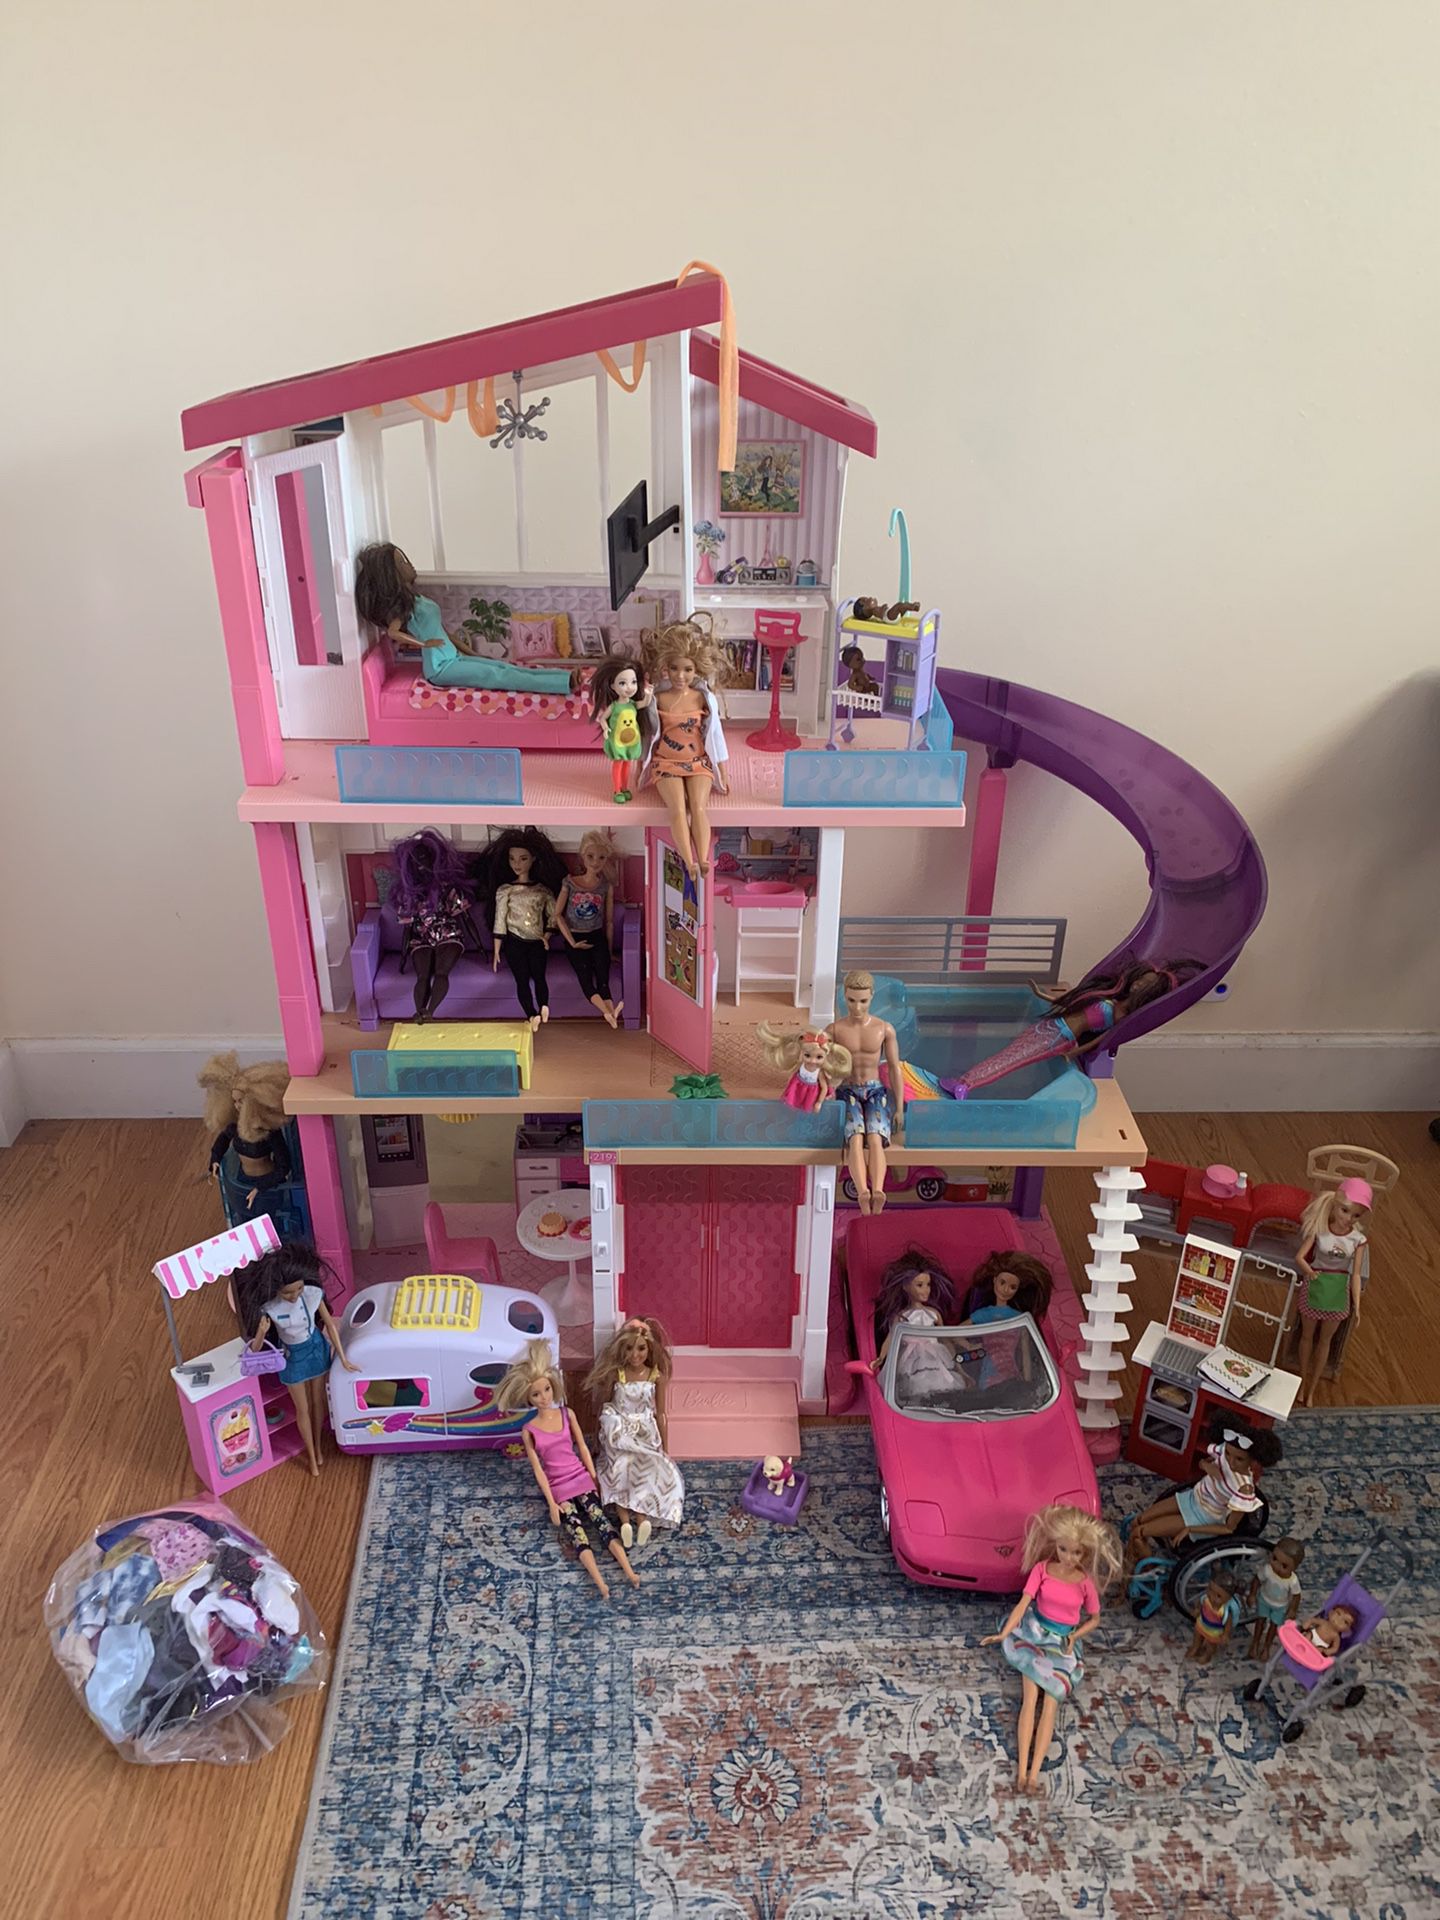 Barbie Dream House With Extras for Sale in Bayonne, NJ - OfferUp